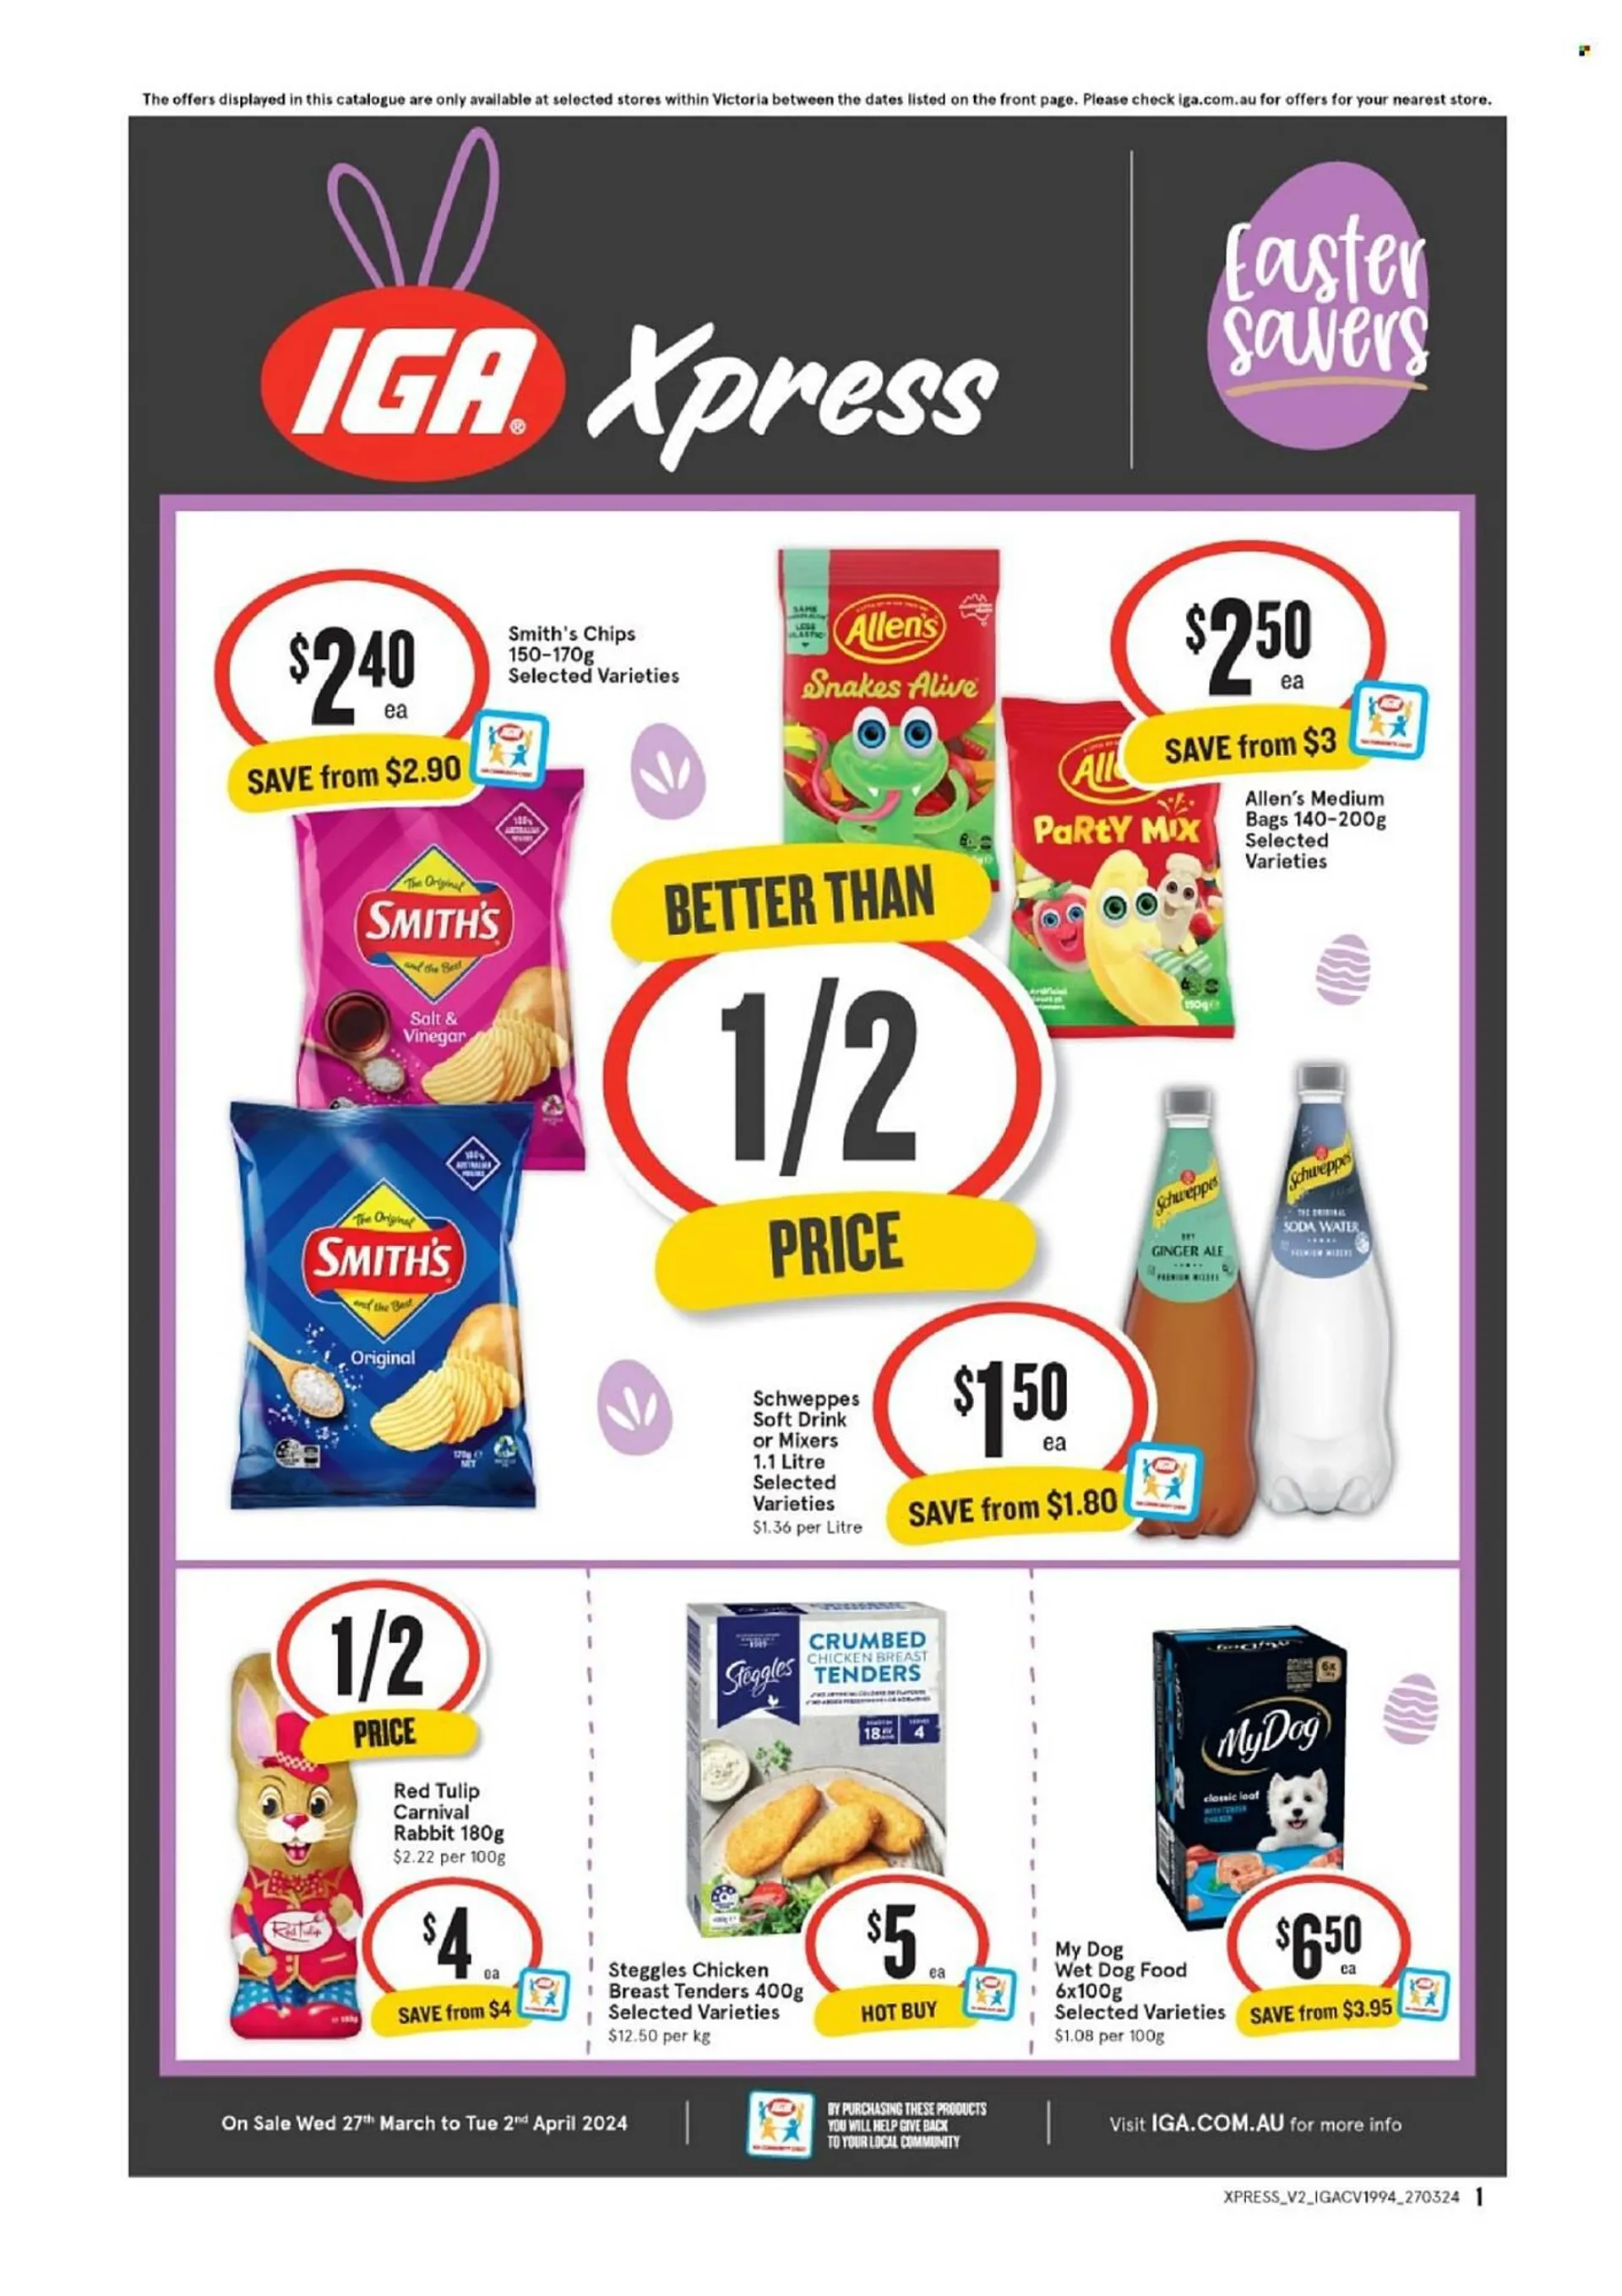 IGA Xpress catalogue - Catalogue valid from 27 March to 2 April 2024 - page 1